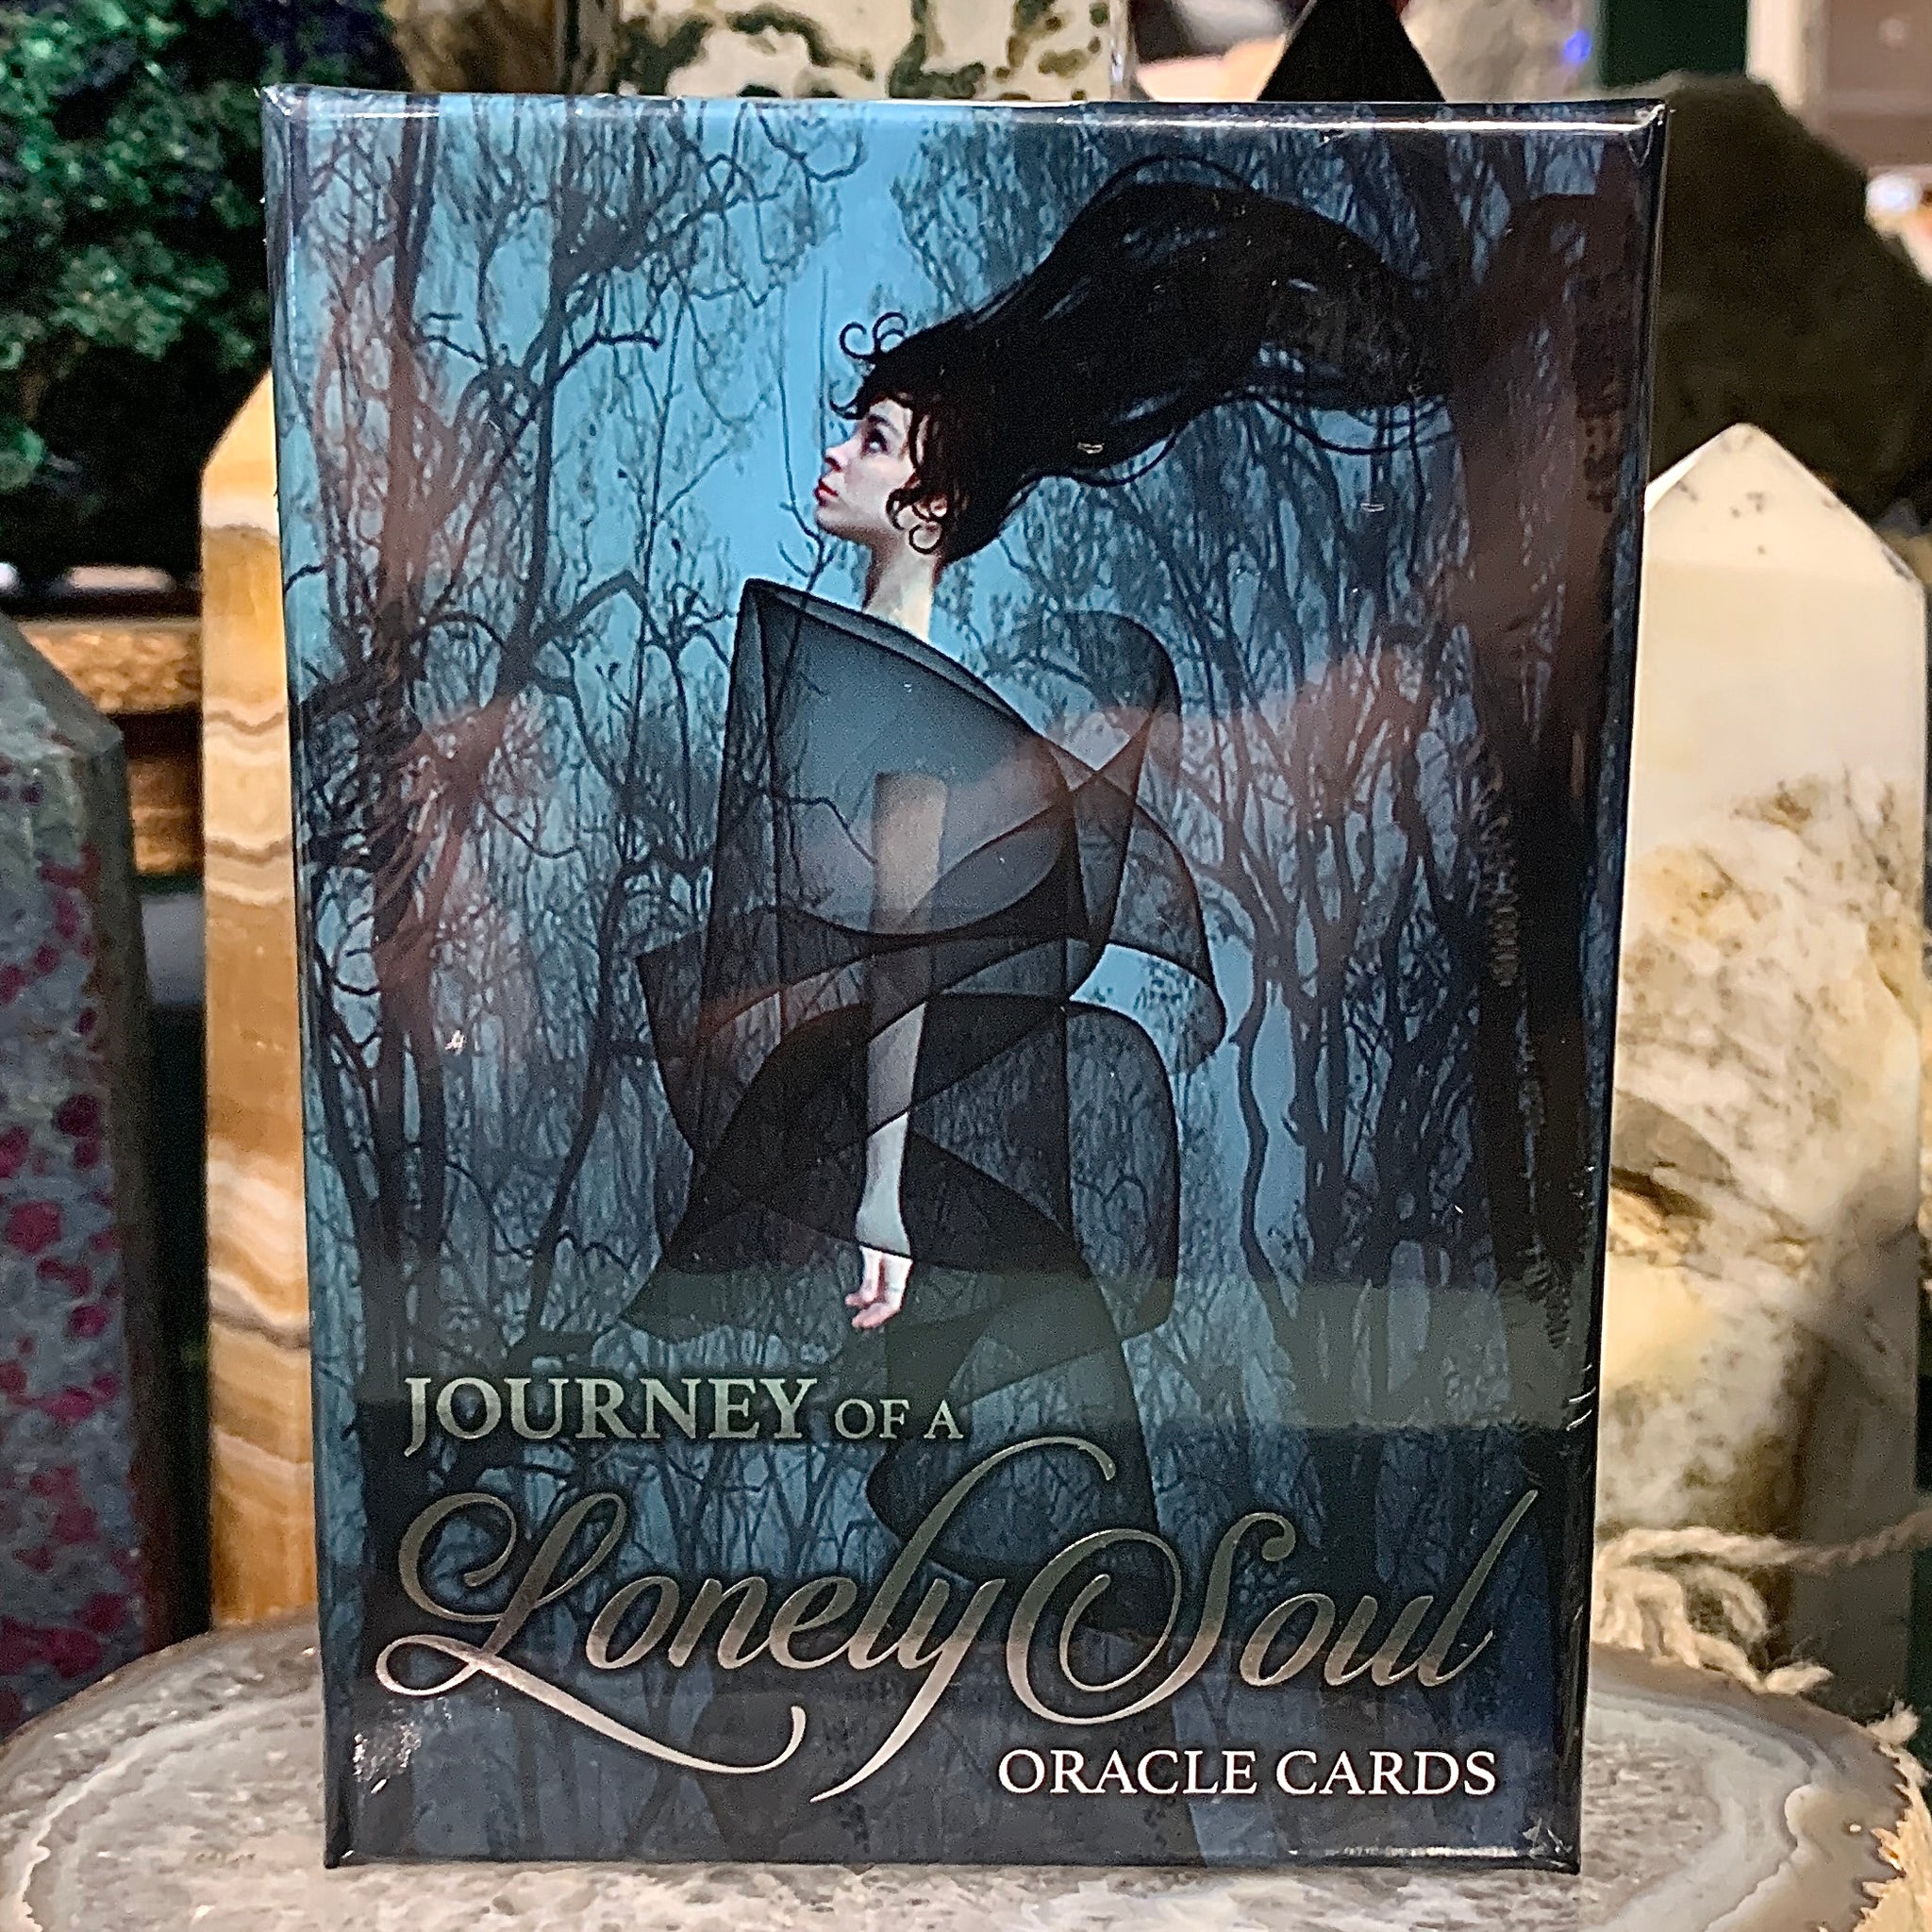 Journey of a Lonely Soul Oracle Cards by Anna Majaborda & Charles Harrington